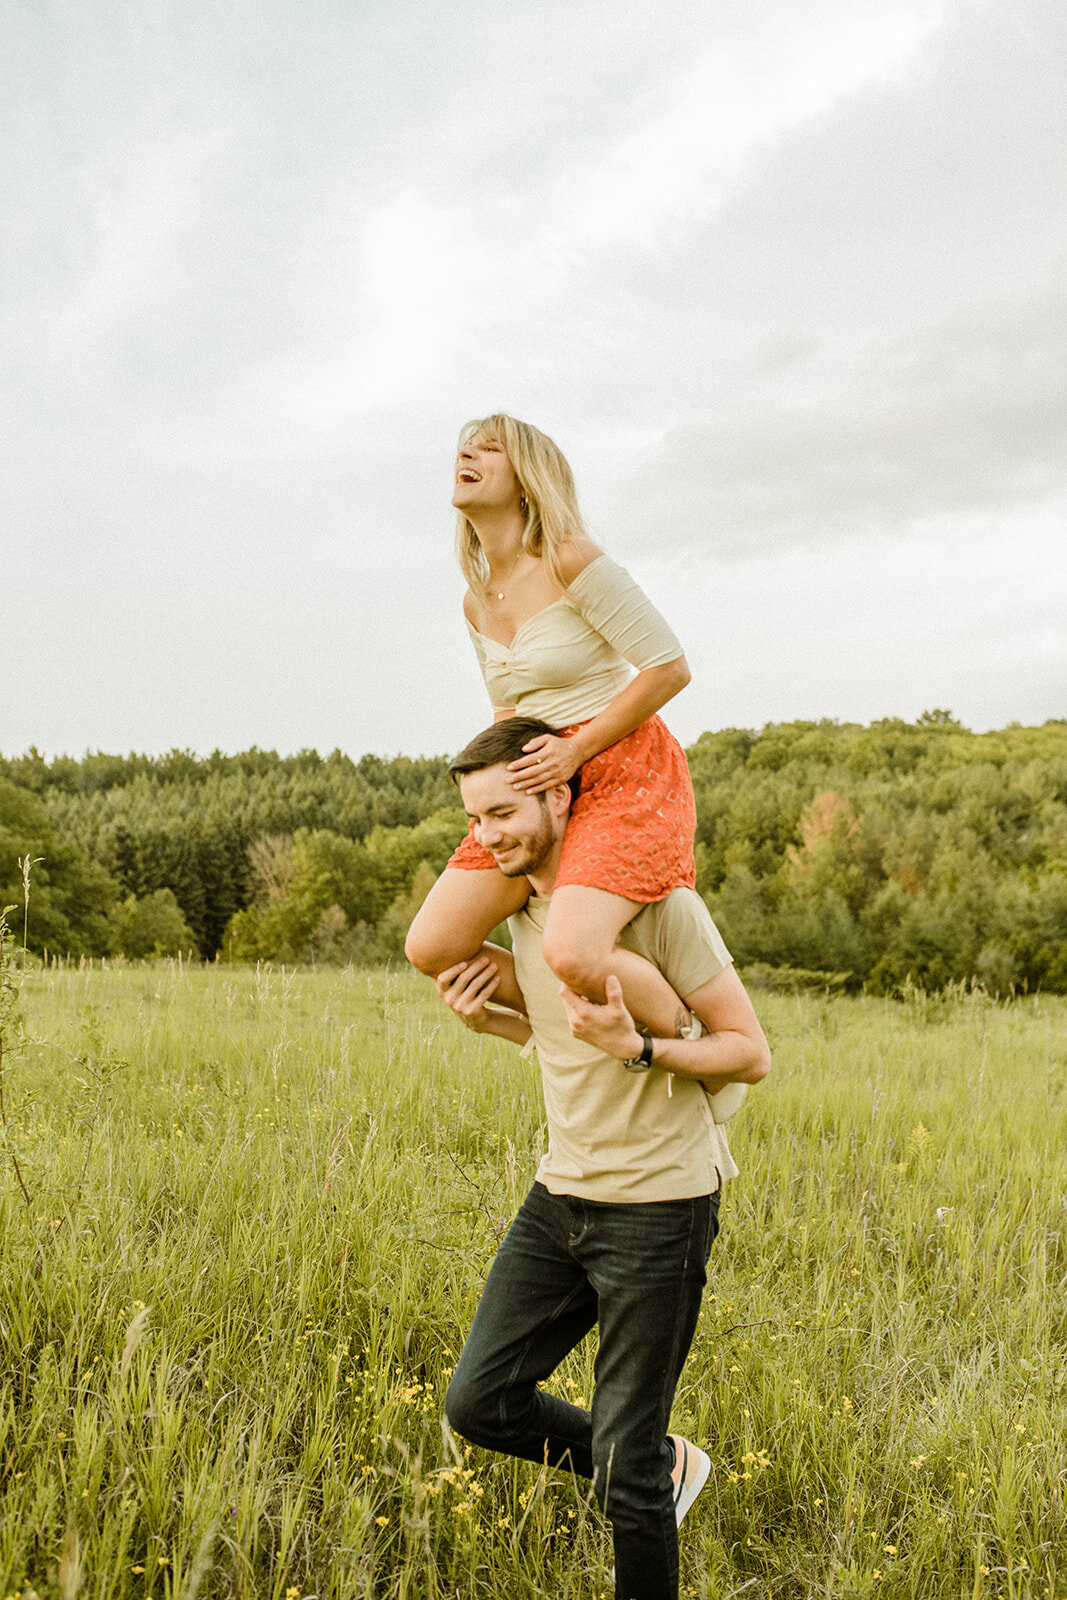 country-cut-flowers-summer-engagement-session-fun-romantic-indie-movie-wanderlust-356